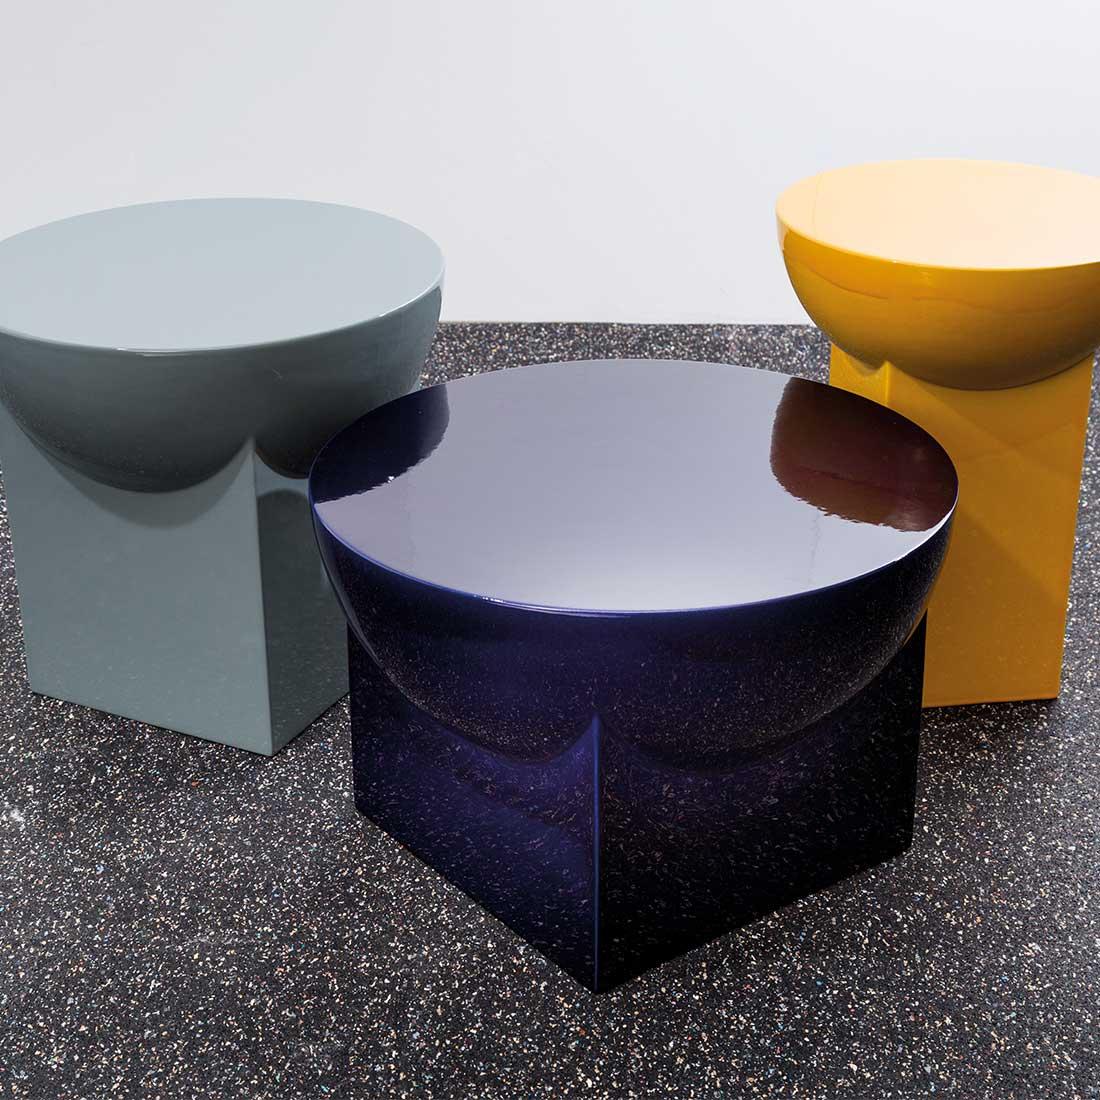 Three heights from one source, in two different shapes always based on the motto “the round must go into the square”, and it does! Sebastian Herkner’s side table series mila of massive ceramics form a slender foot, rounded up by a broad, smooth